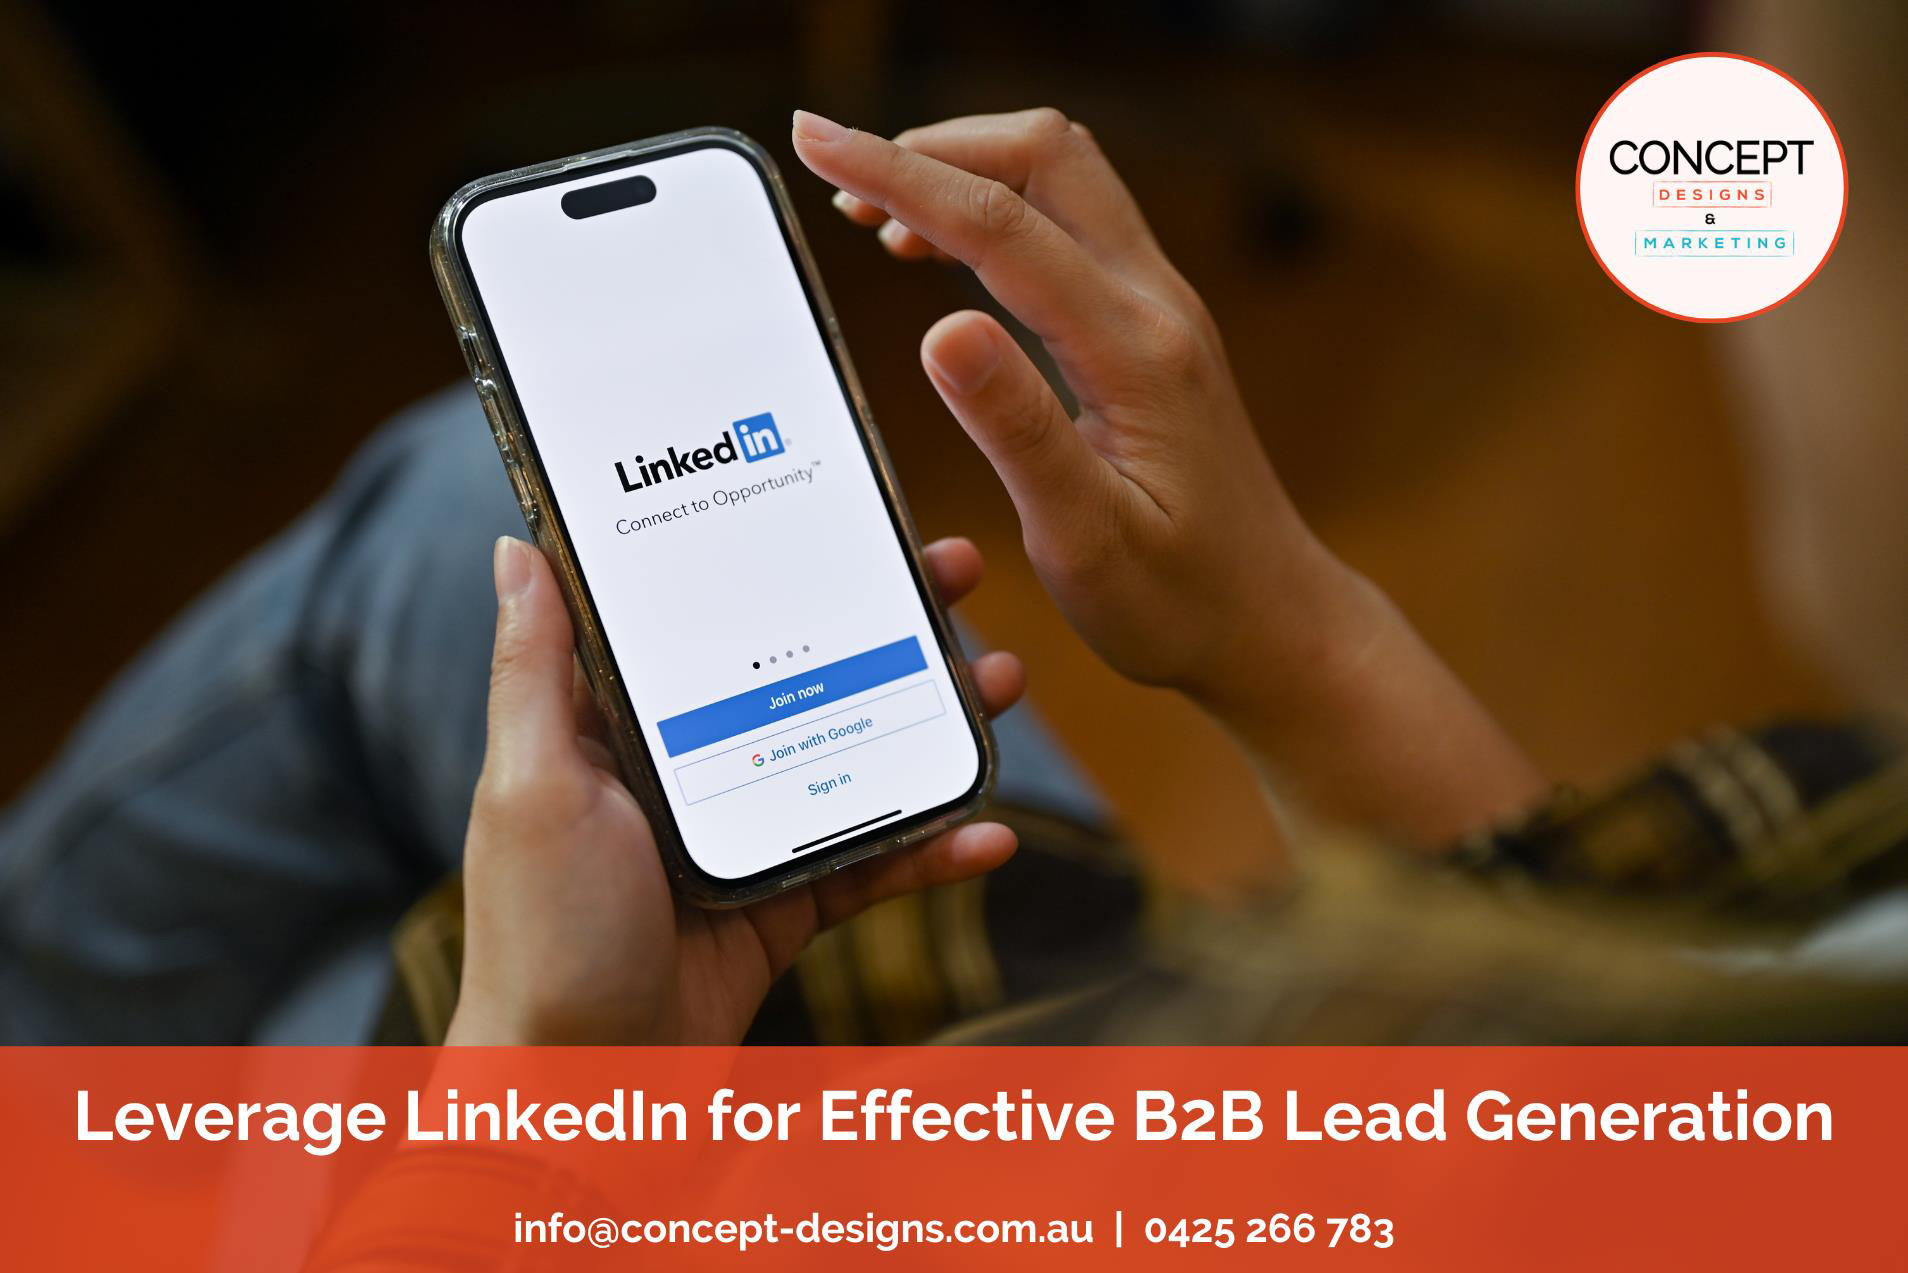 Leverage LinkedIn for Effective <span class="caps">B2B</span> Lead Generation: A Service by Concept Designs <span class="amp">&</span> Marketing